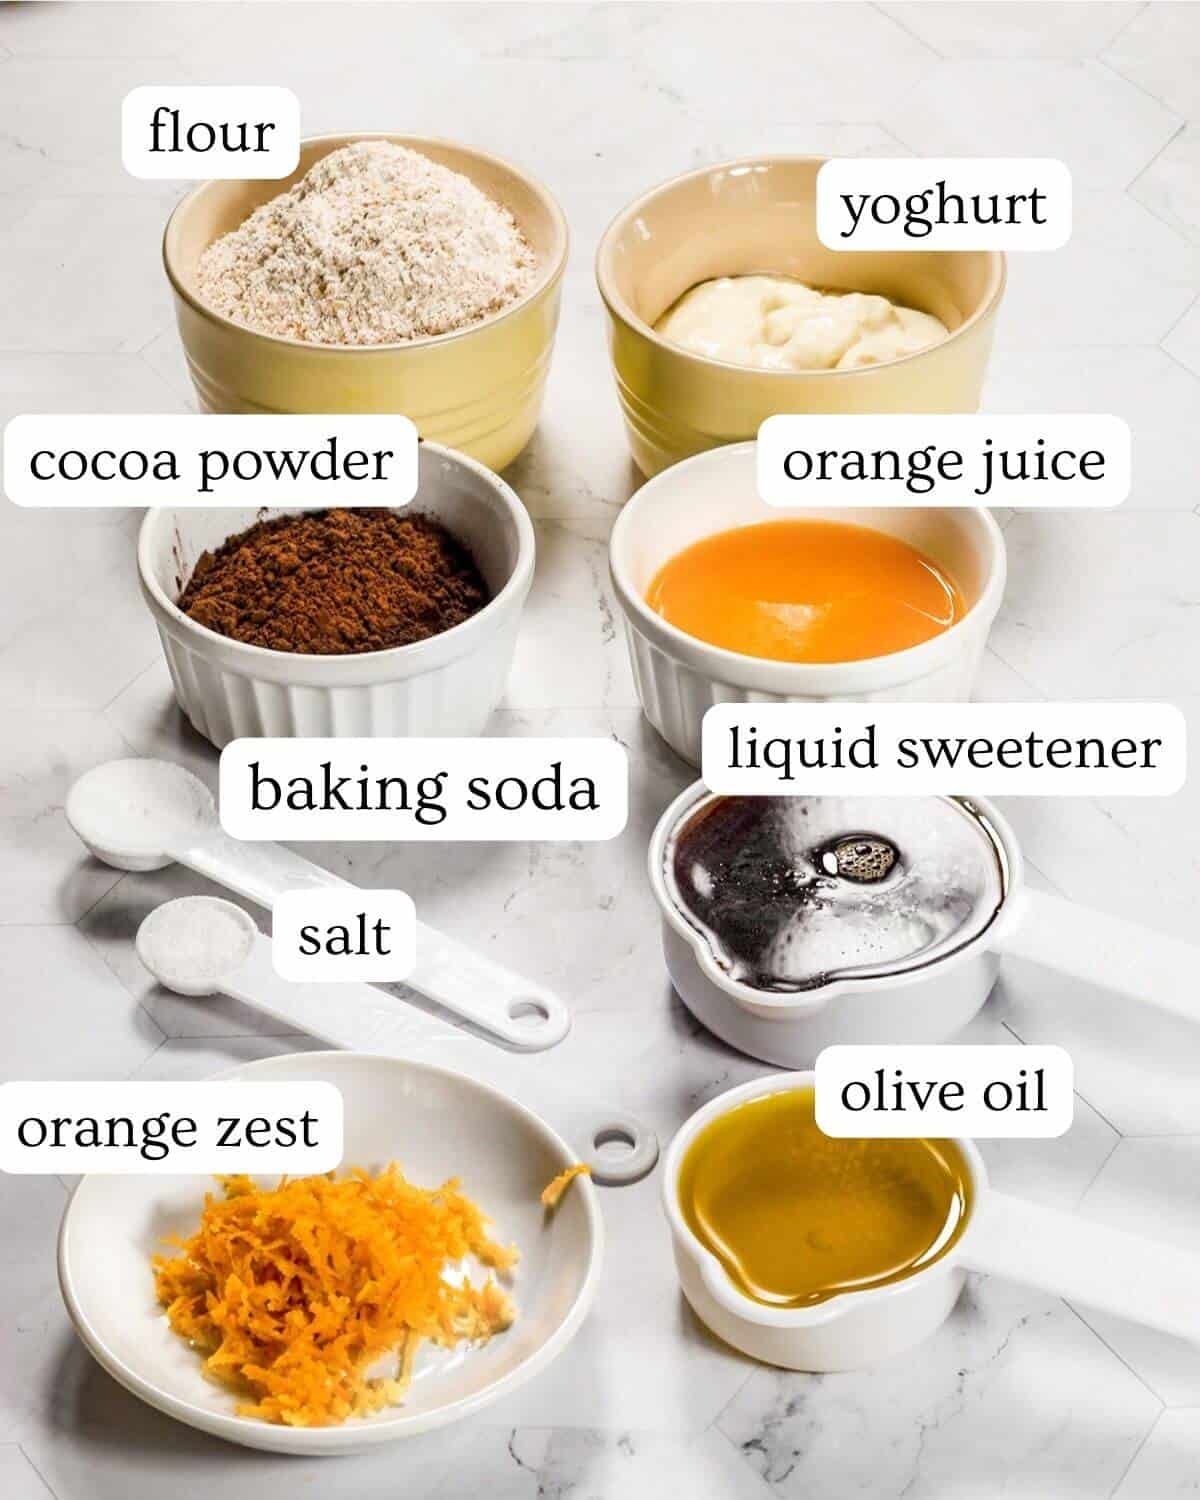 Ingredients for a healthy chocolate orange fudge cake.